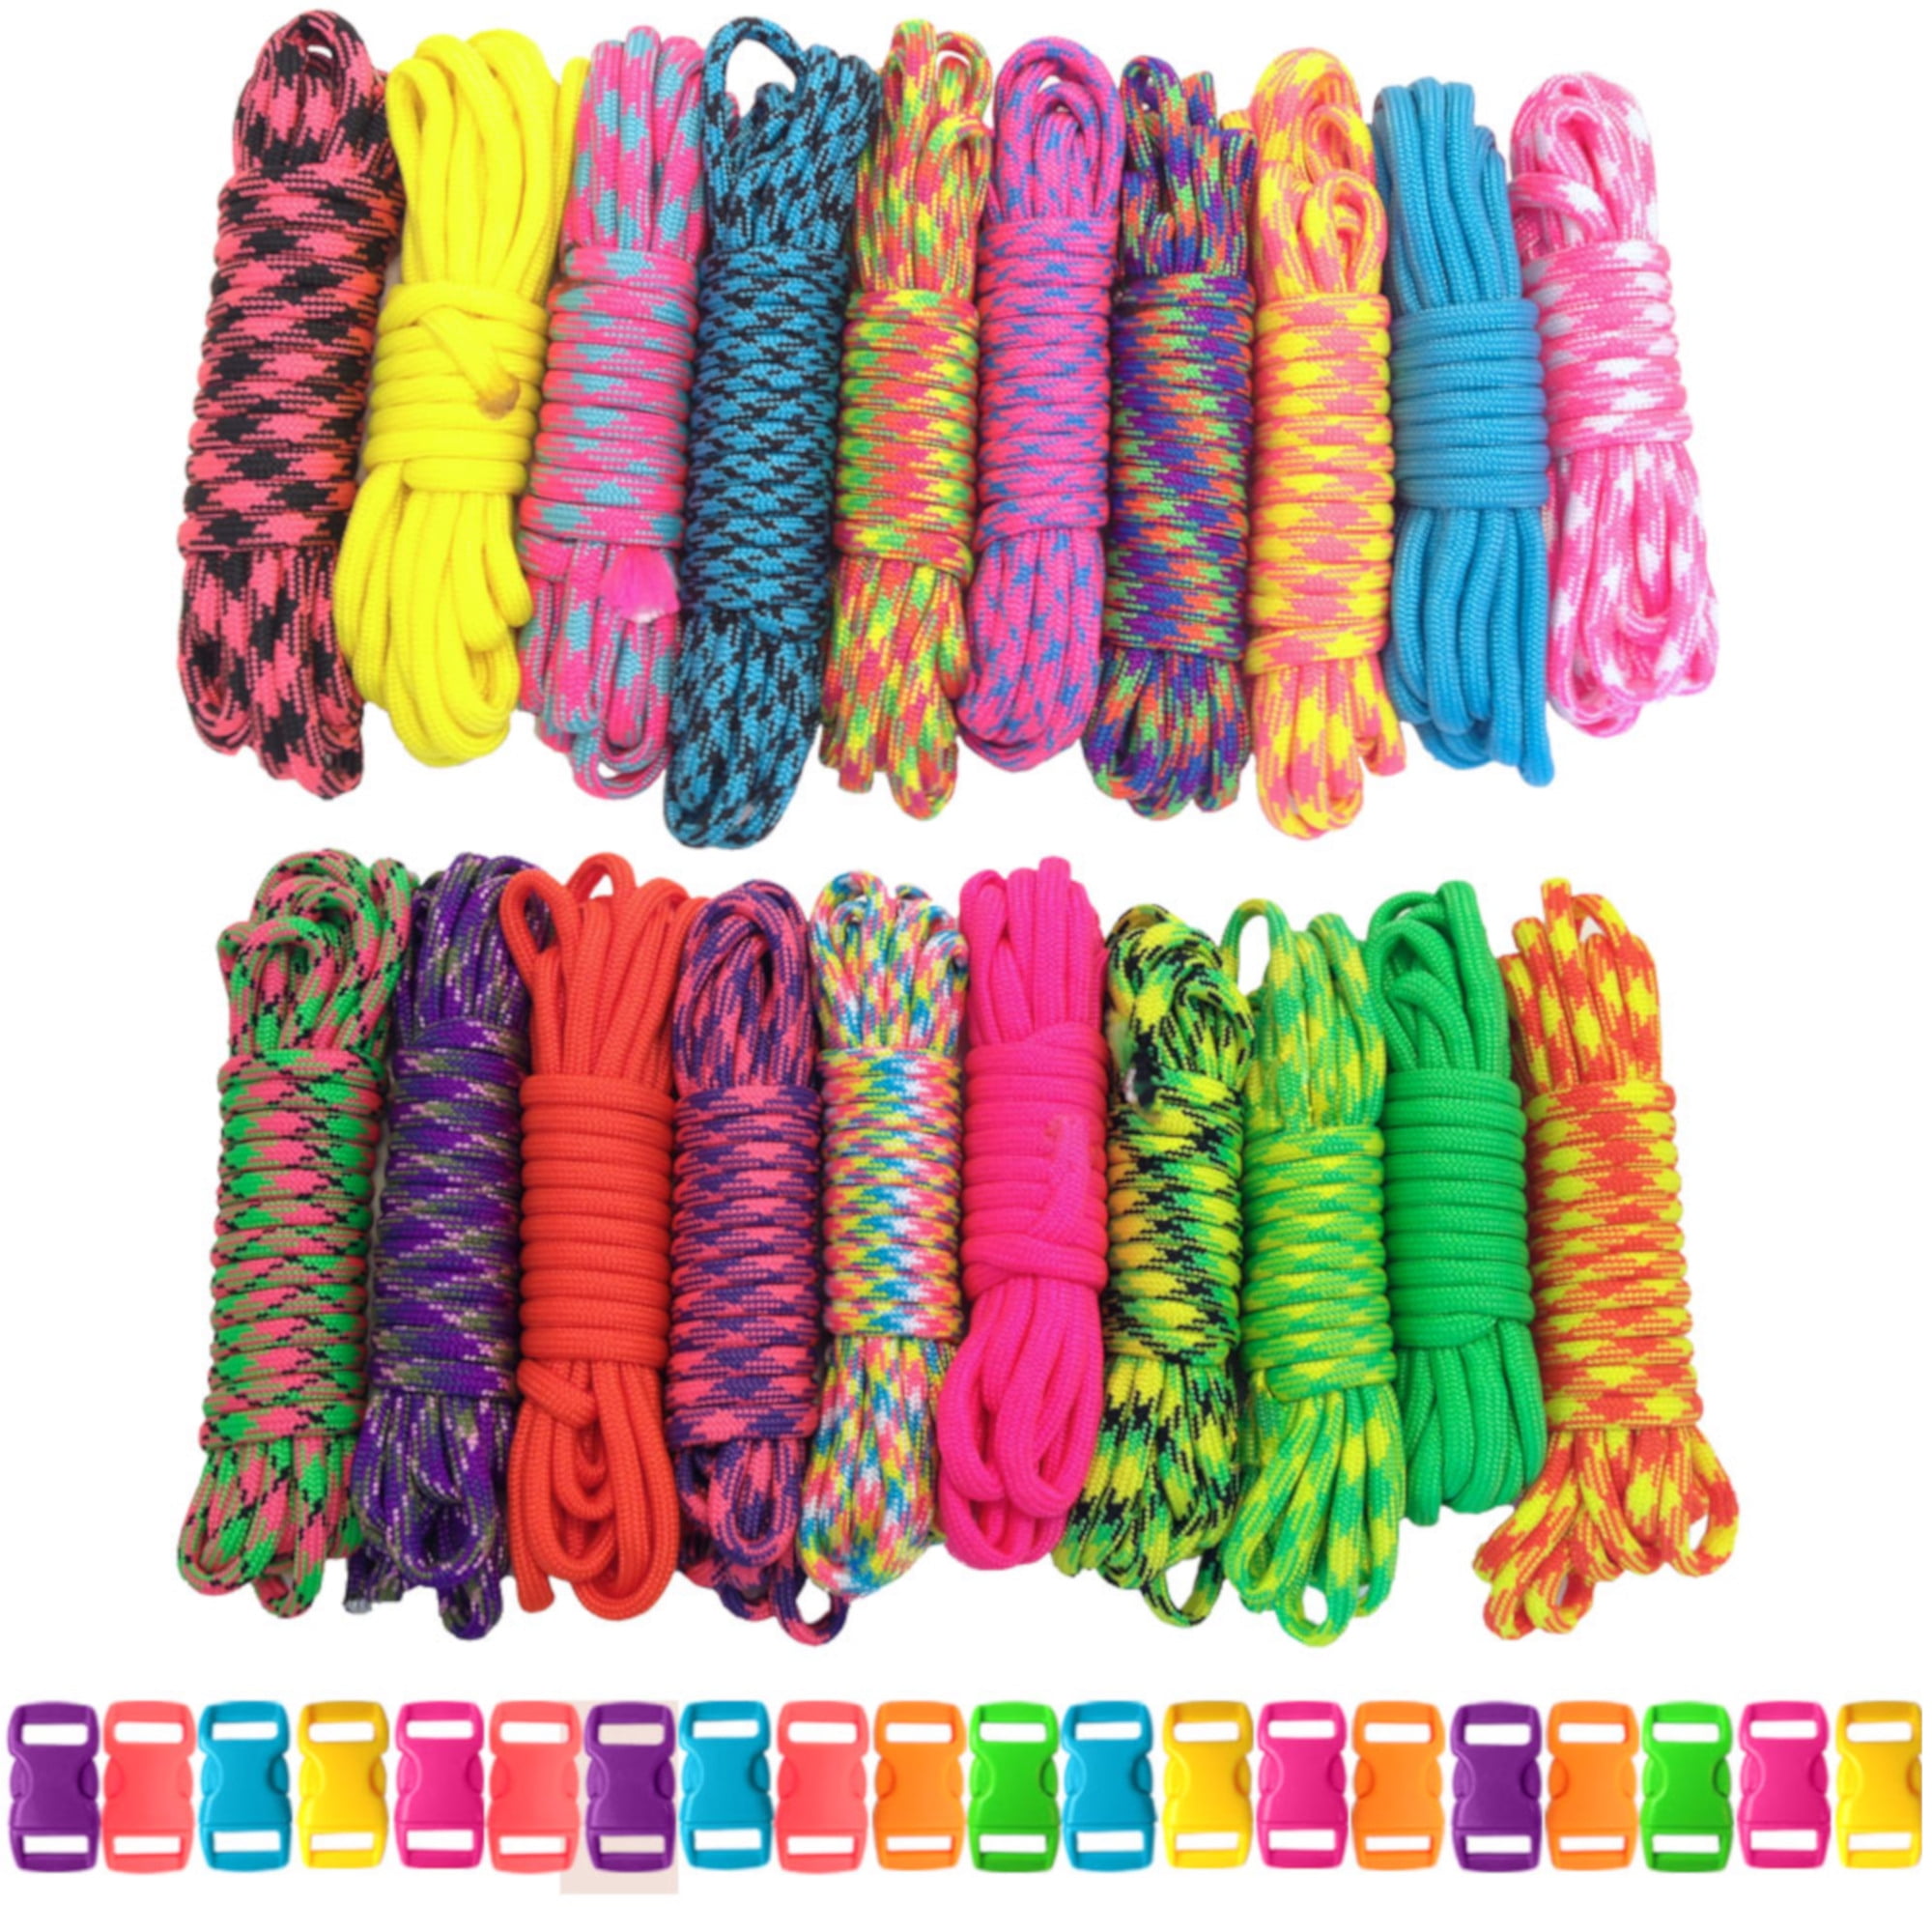 16 Colors Paracord Cord 550 Paracord Bracelet Crafting Combo Kits with Instruct 